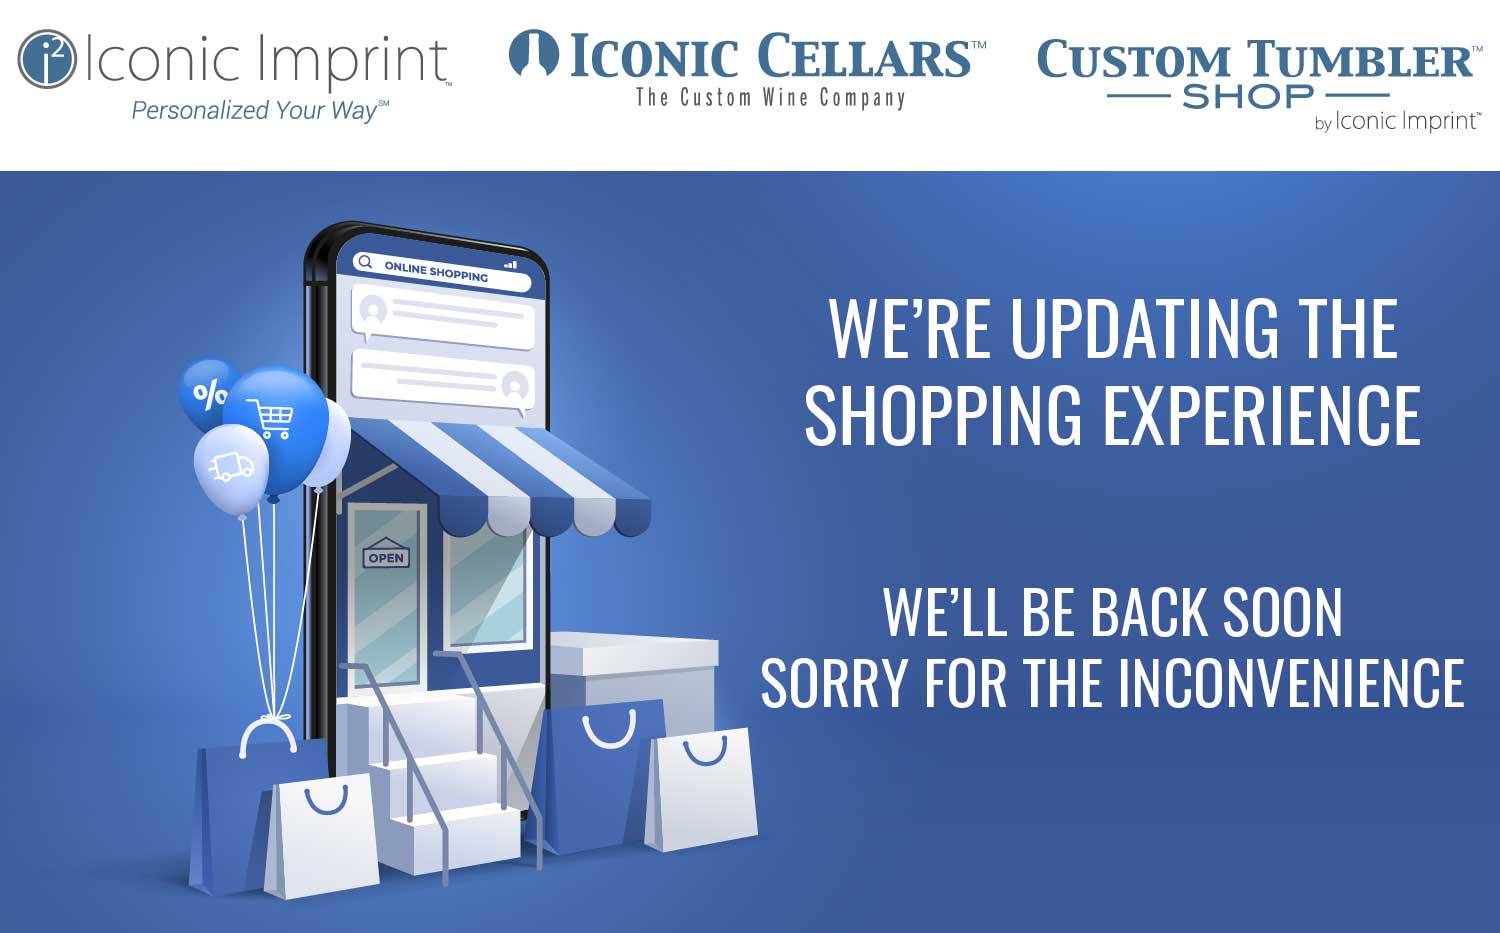 We're Updating the Shopping Experience